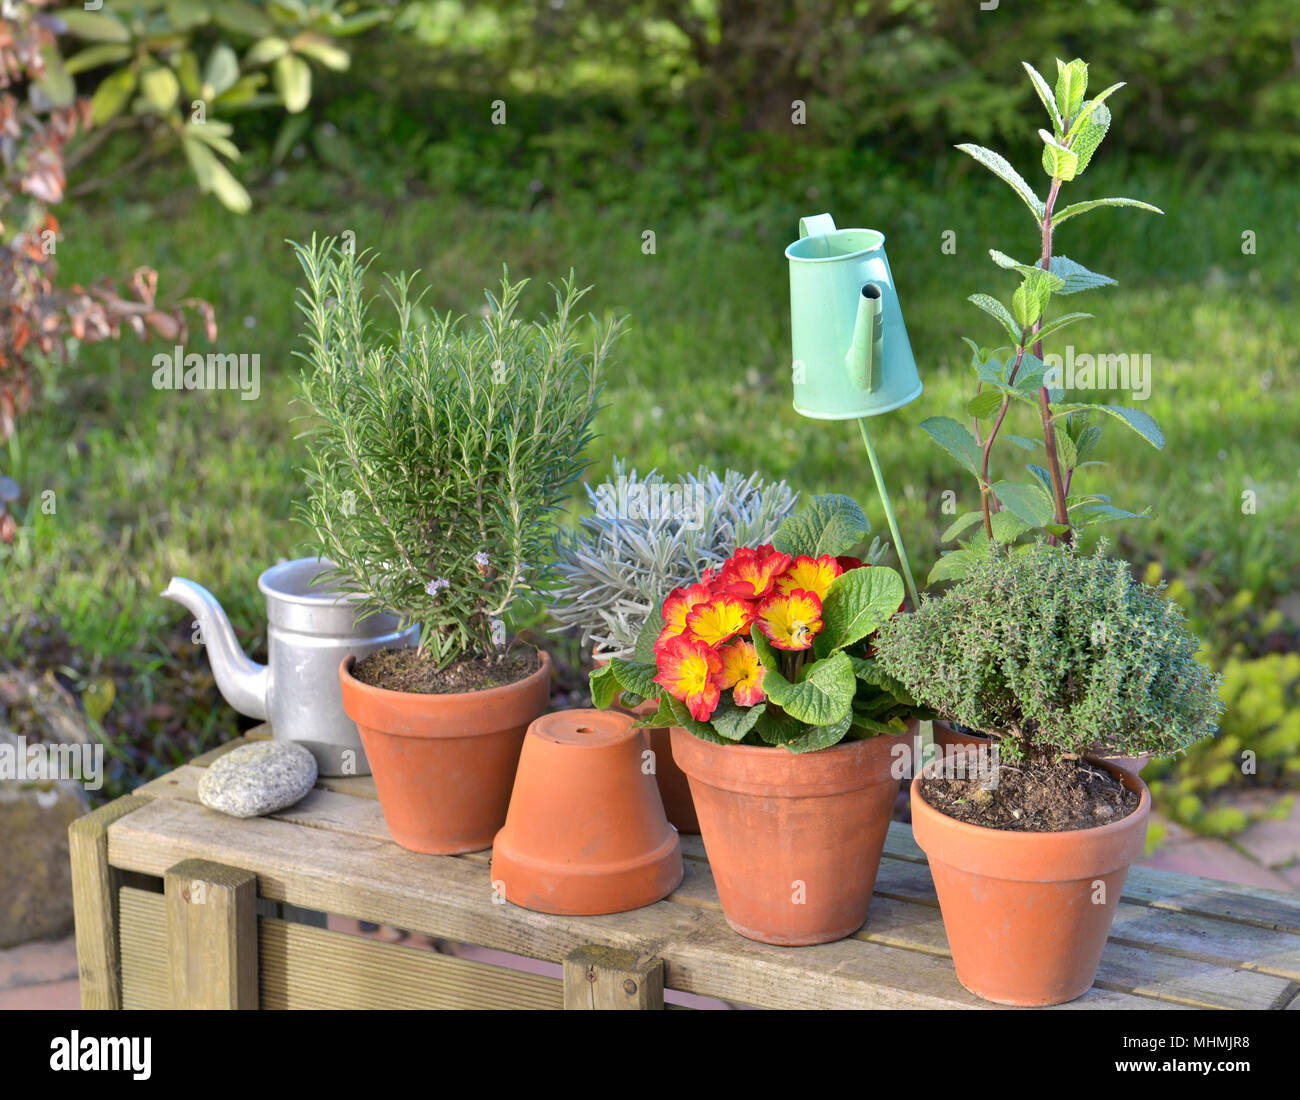 decorative green watering can in flowers and aromatic plants potted in a garden Stock Photo